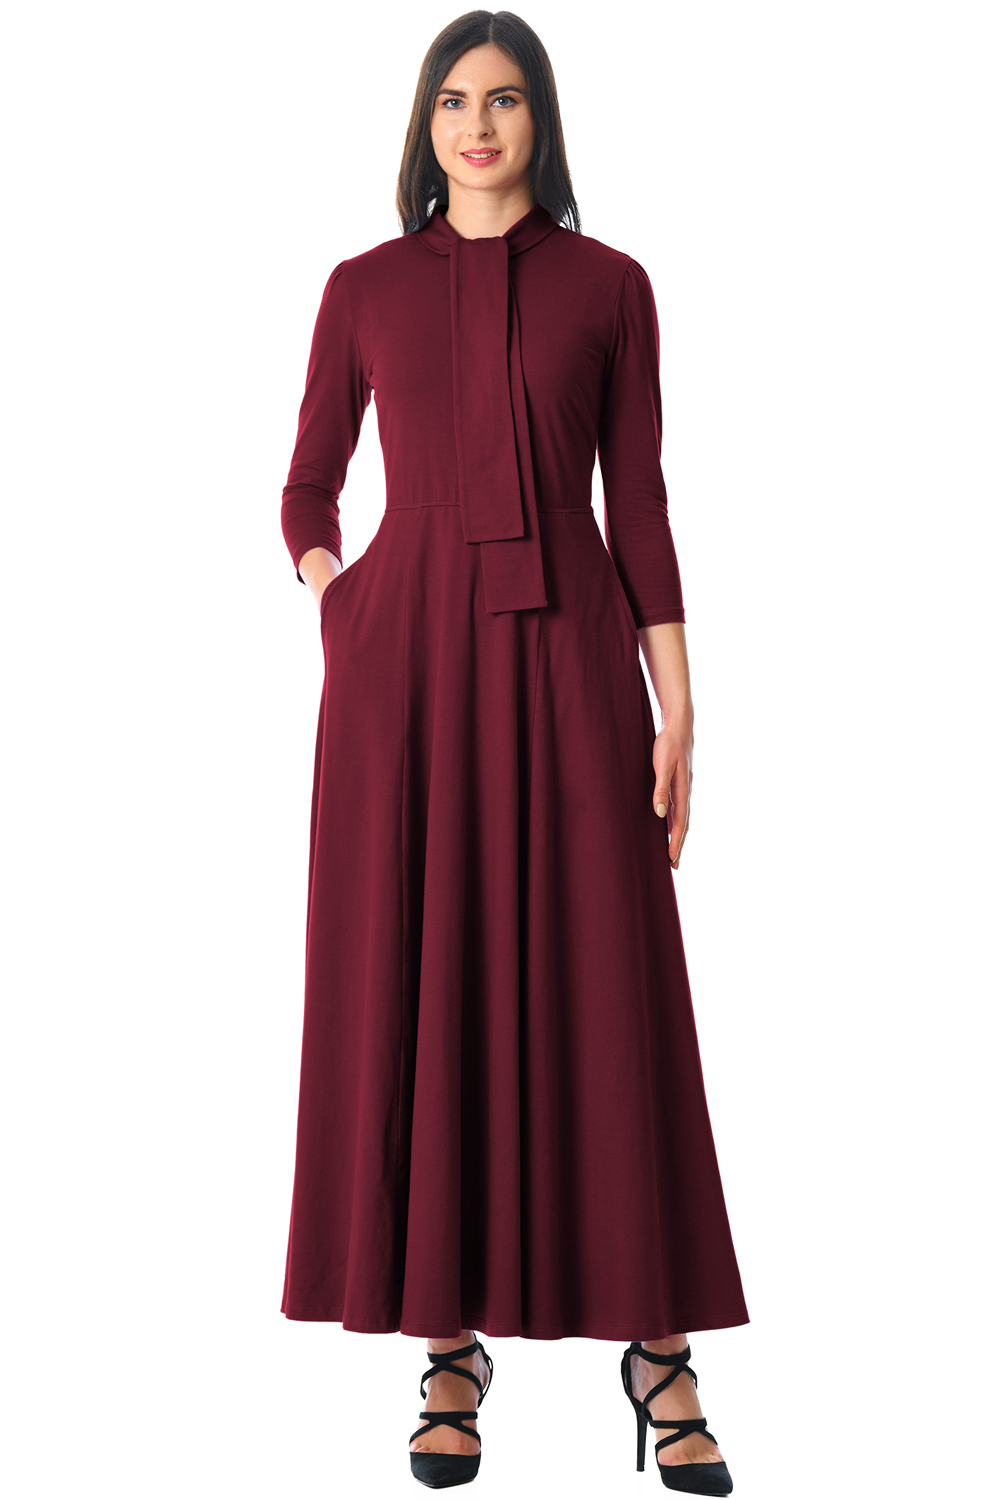 BY610398-3 Burgundy Pocketed  Sleeves Tie Neck Maxi Dress